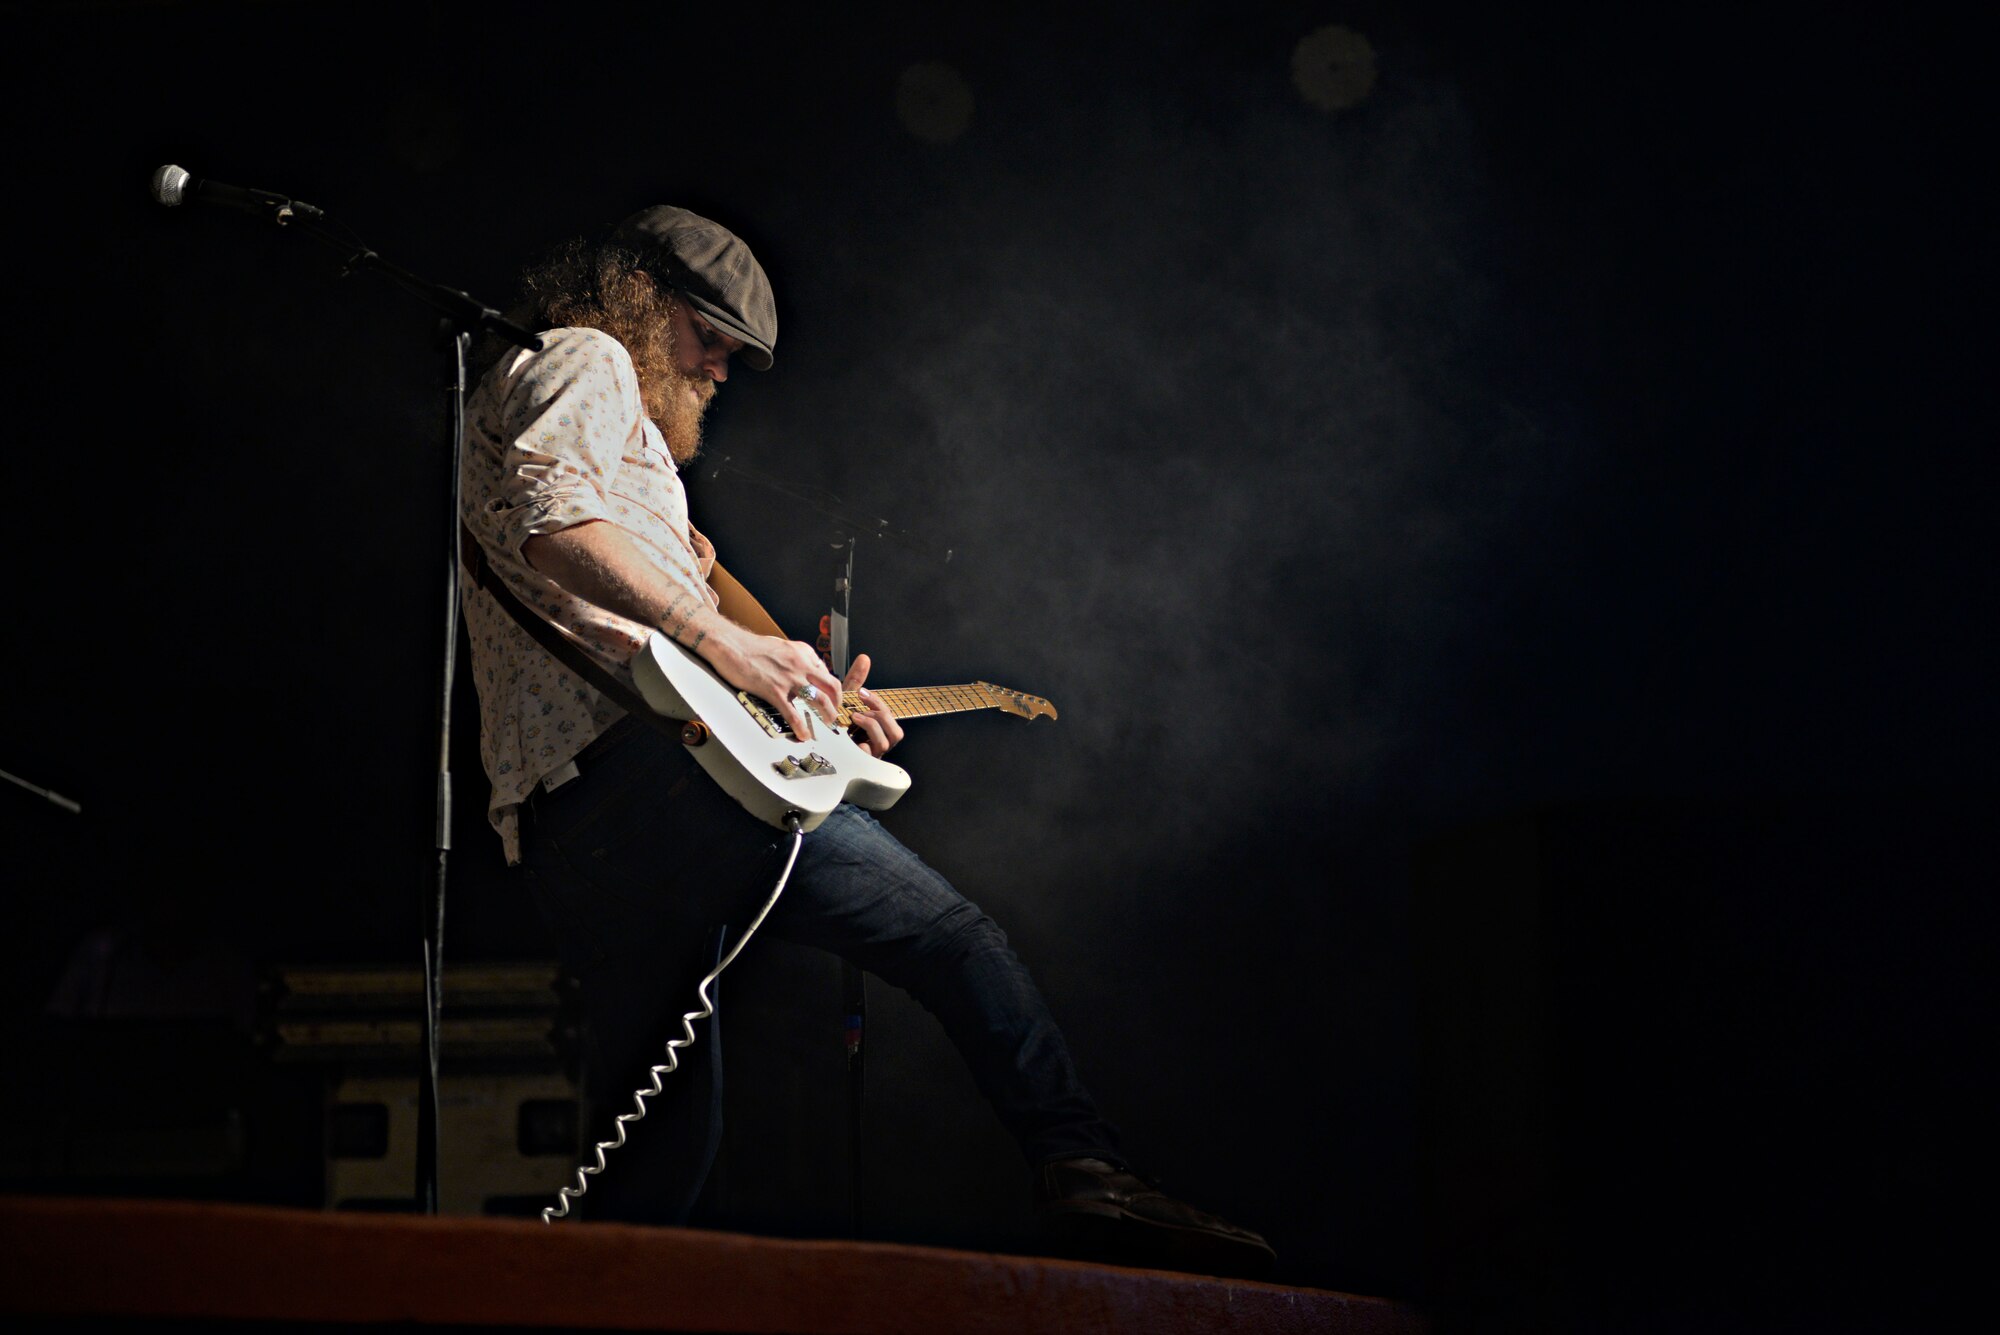 John Osborne, Brothers Osborne lead guitarist, plays a guitar solo during a concert March 12, 2016, at Andersen Air Force Base, Guam. While on Guam, the band played two concerts on Andersen AFB and U.S. Naval Base Guam. (U.S. Air Force photo/ Airman 1st Class Jacob Skovo)